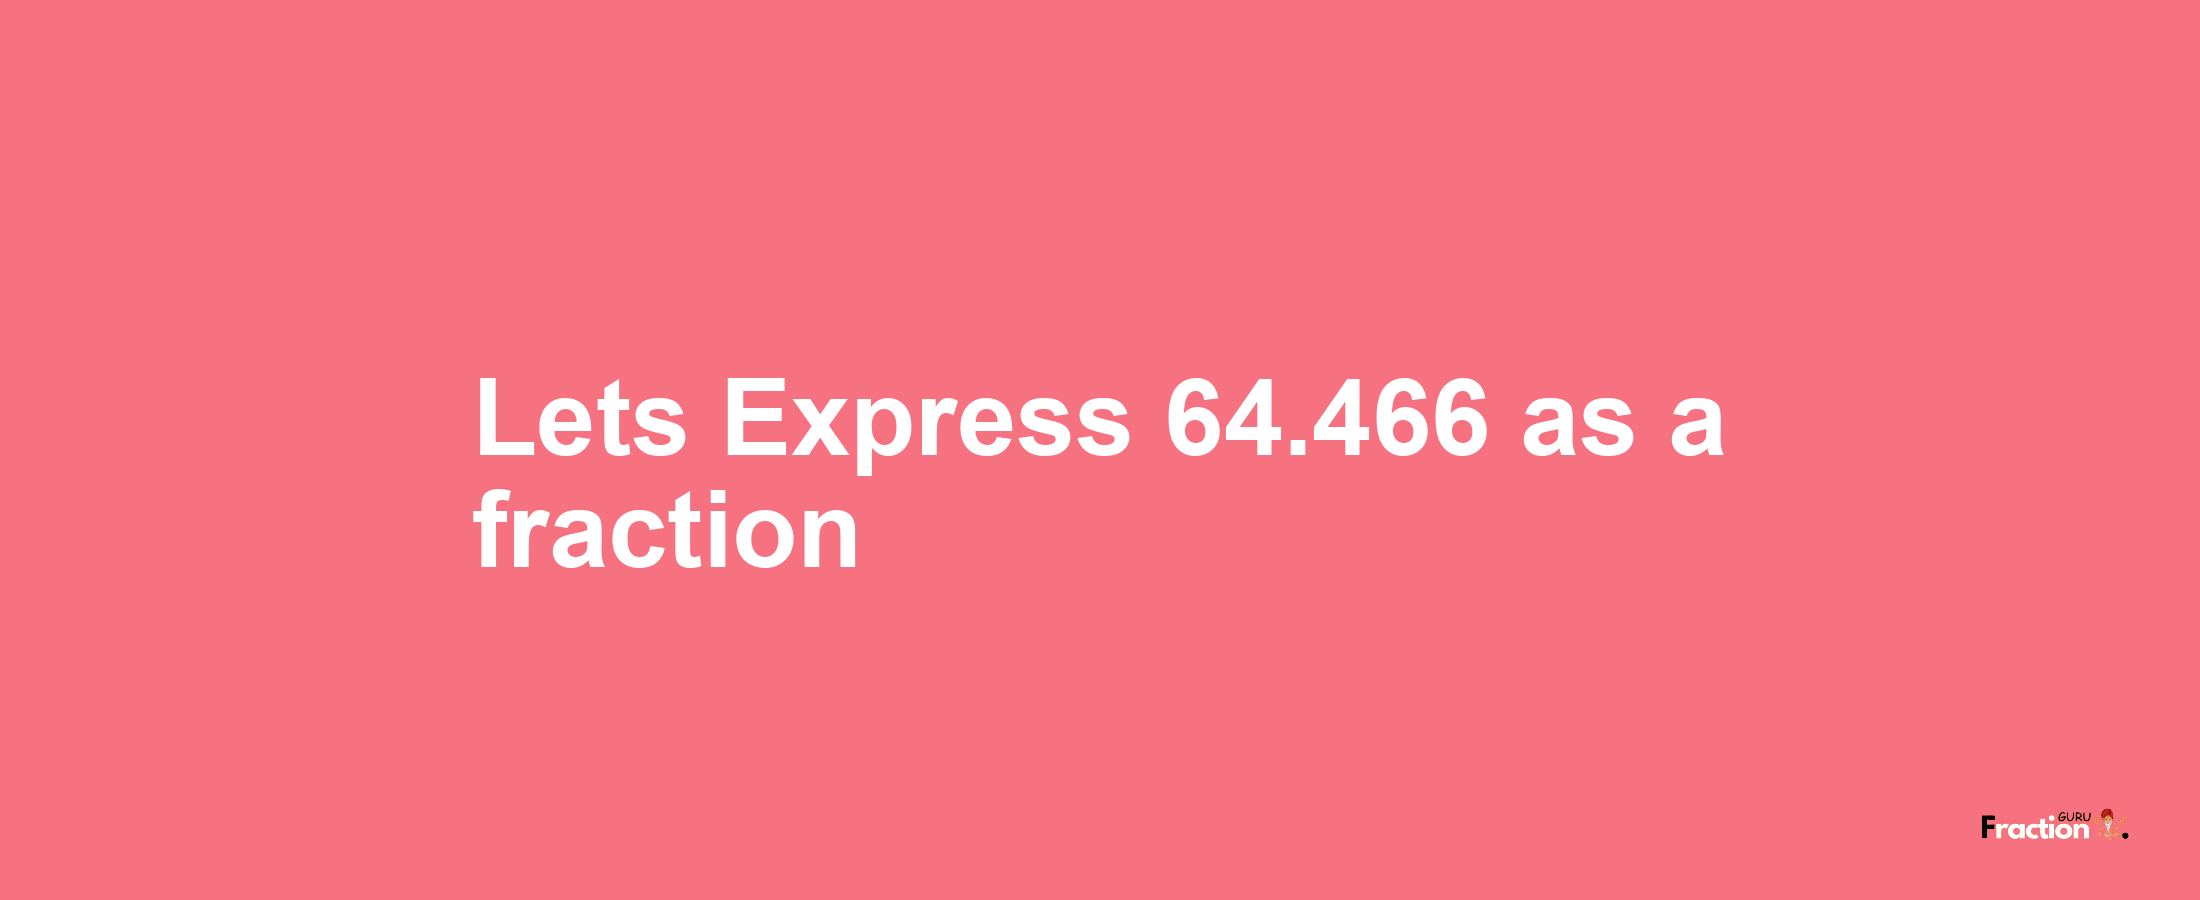 Lets Express 64.466 as afraction